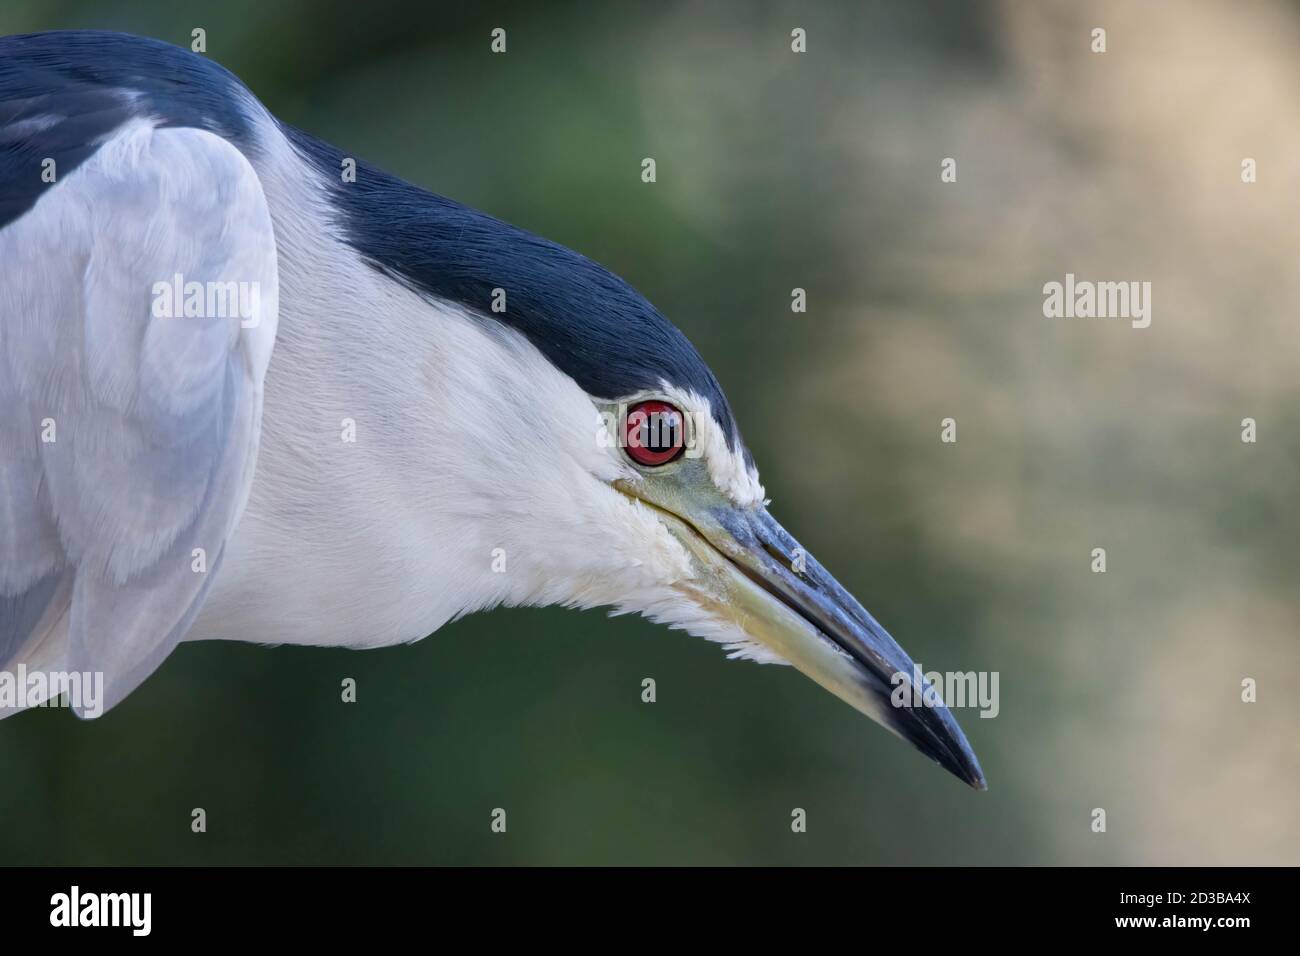 Black crowned night heron side view close-up portrait Stock Photo